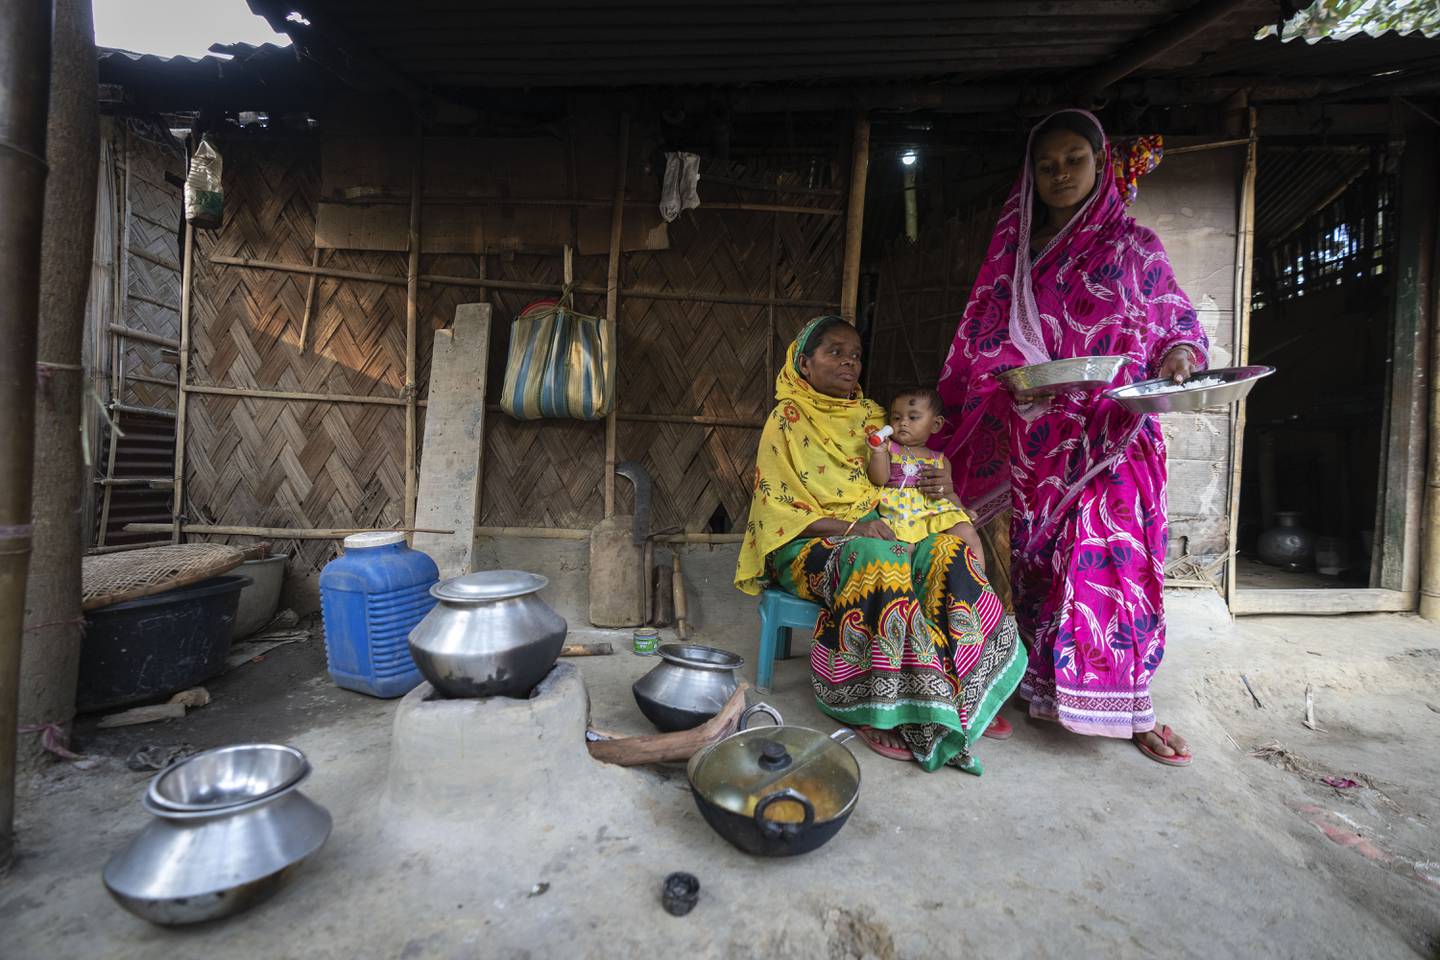 Nureja Khatun, 19, right, brings food for her mother in law in their shanty home, in Morigaon district of Indian northeastern state of Assam, Saturday, Feb. 11, 2023. Khatun's husband Akbor Ali is one among more than 3,000 men, including Hindu and Muslim priests, who were arrested nearly two weeks ago in the northeastern state of Assam under a wide crackdown on illegal child marriages involving girls under the age of 18. (AP Photo/Anupam Nath)